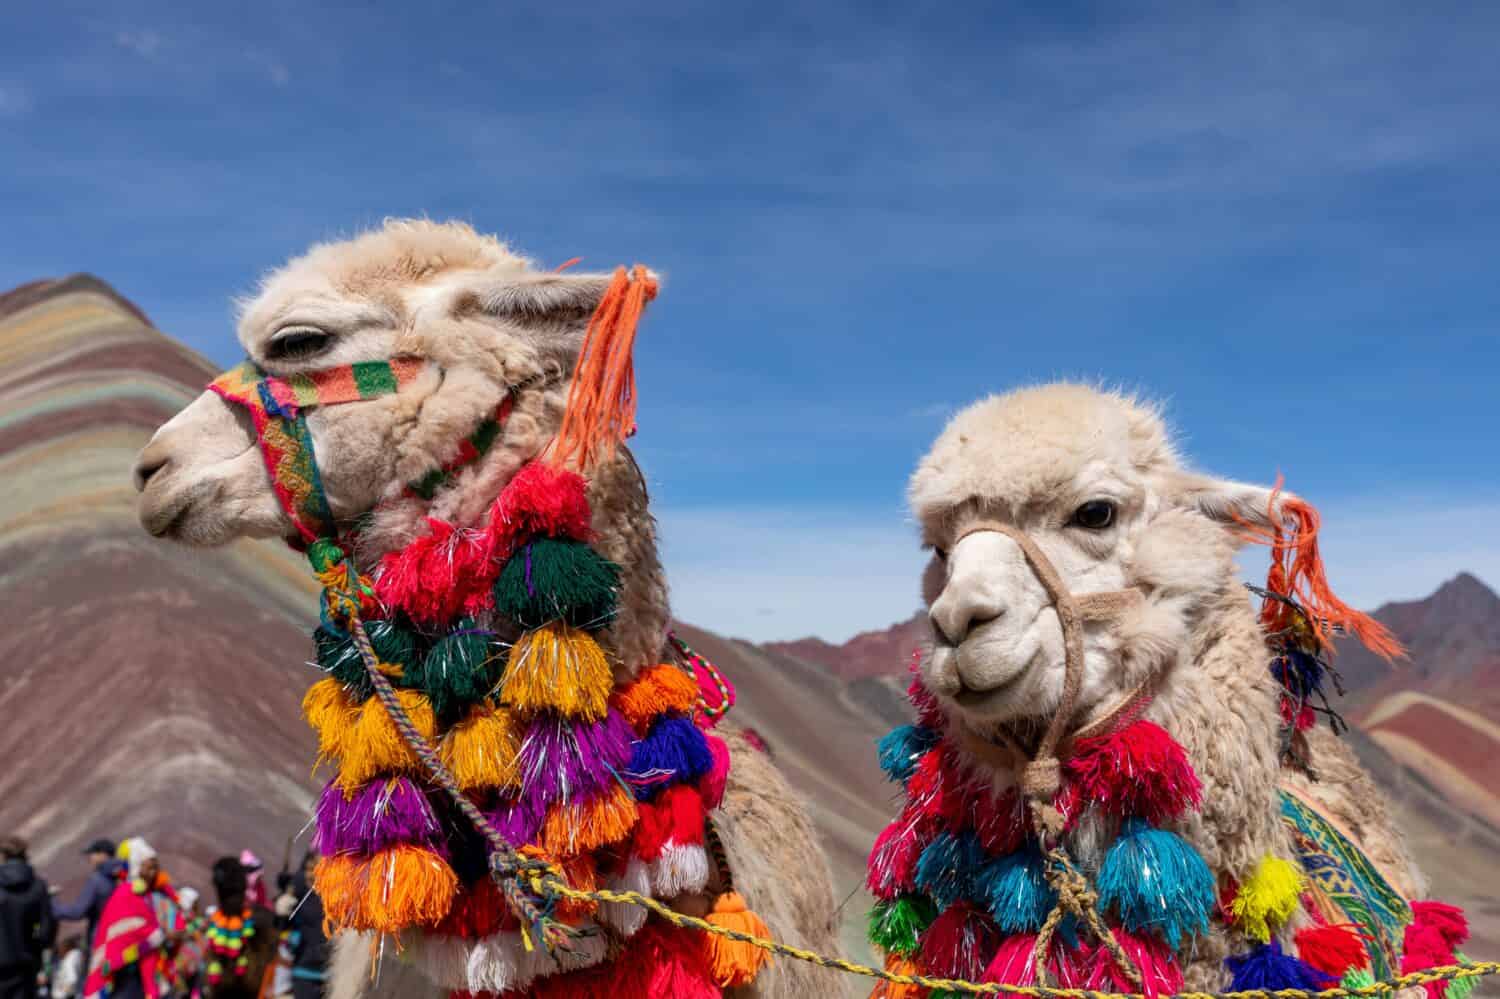 Lamas at the top of the Vinicunca mountain, or "mountain of 7 colors" (5200 meters high).